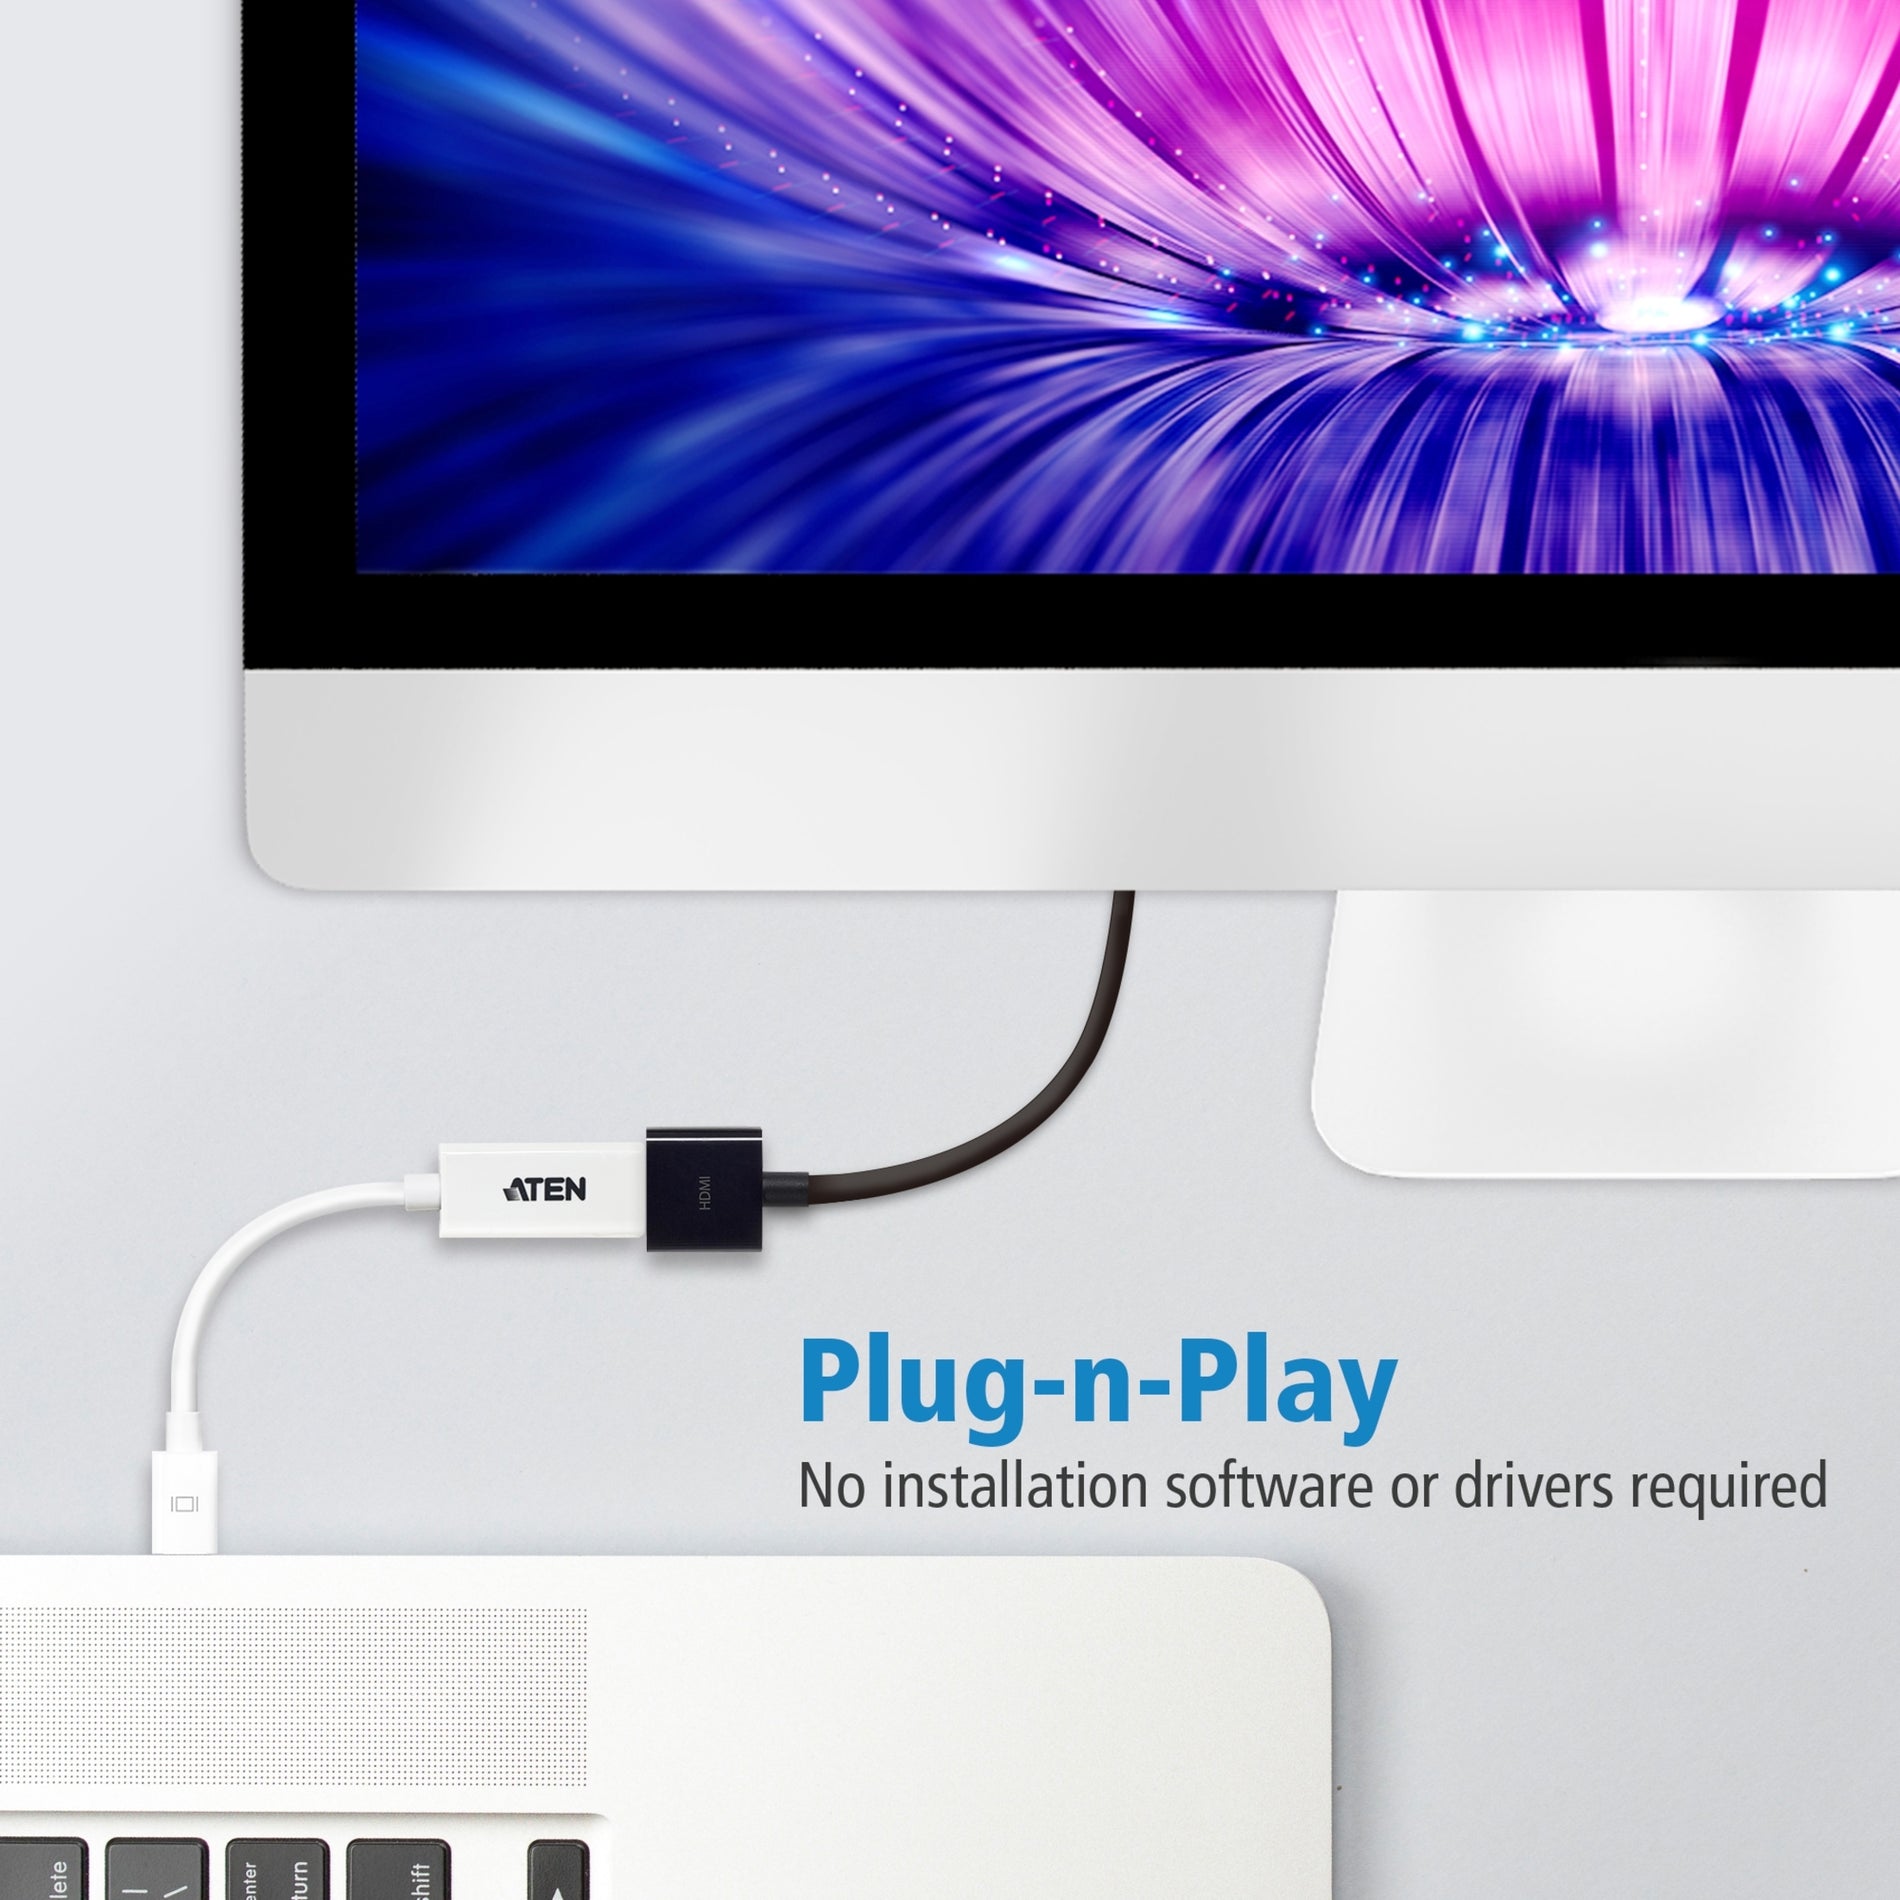 VanCryst VC980 Mini DisplayPort to HDMI Adapter, Connect Your Mac to HDMI Display